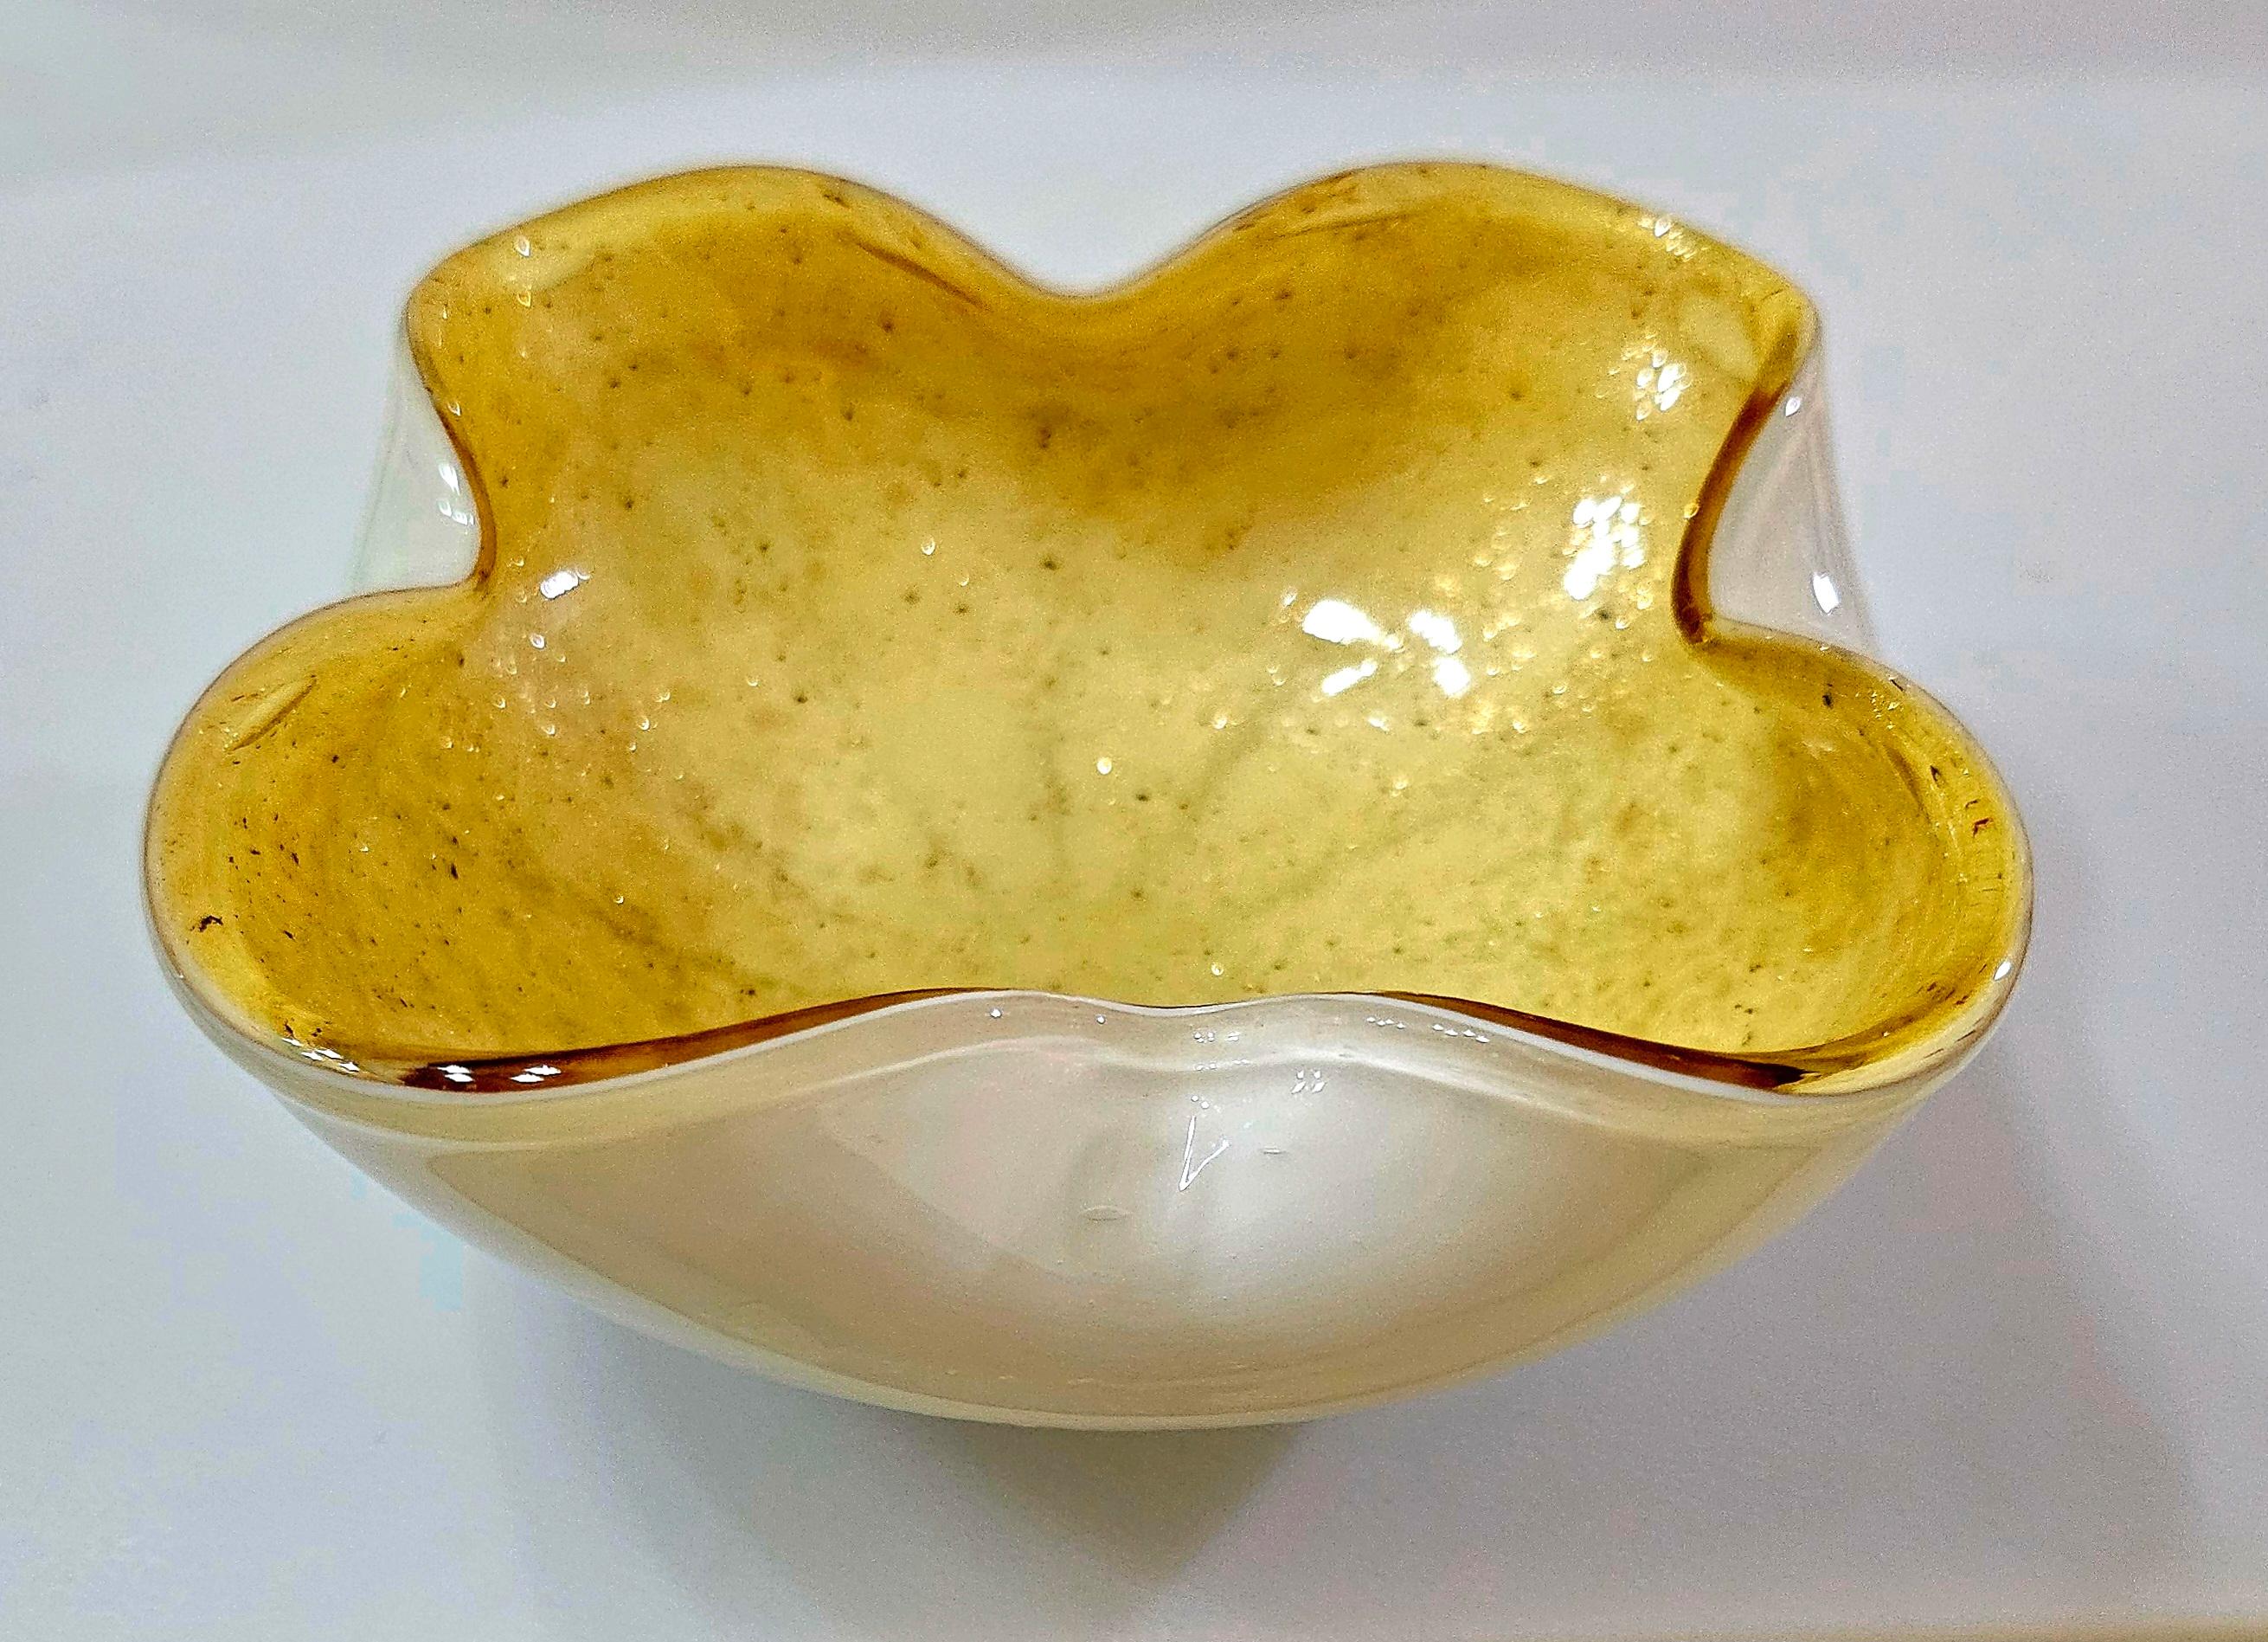 Vintage Murano Glass Bowl / Dish / Ashtray / Catch-All
There are fine gold specks on the inside that seem to 'glitter' on movement.
Approximately 5.5 x 2 inches.
Measurements are approximate. Please be aware that the color on your monitor and/or in